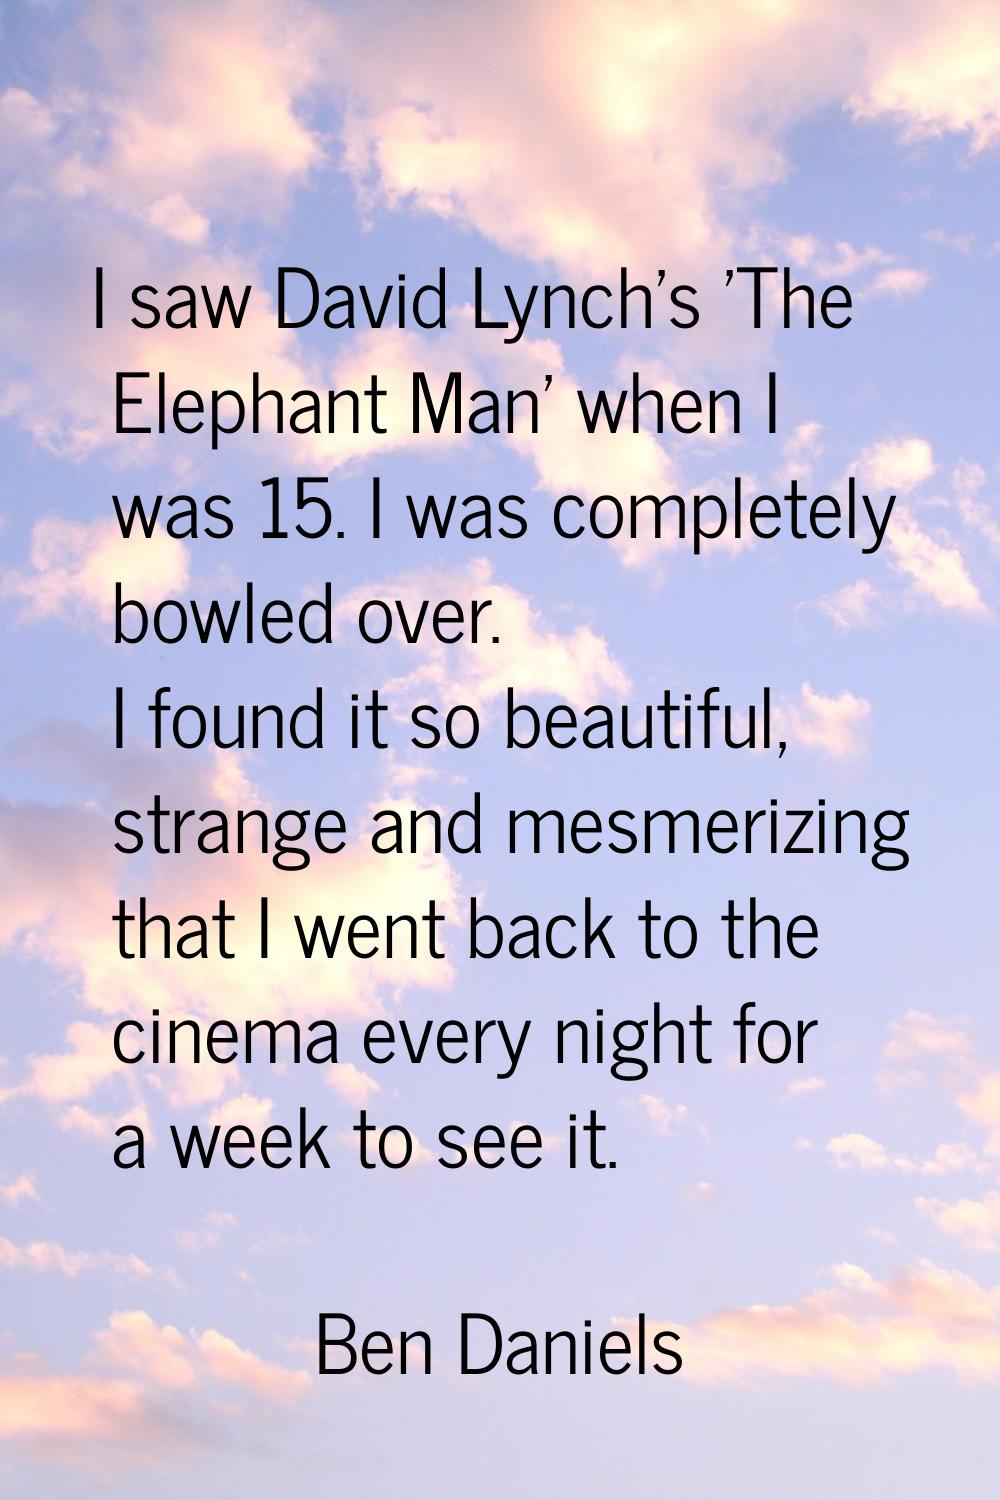 I saw David Lynch's 'The Elephant Man' when I was 15. I was completely bowled over. I found it so b